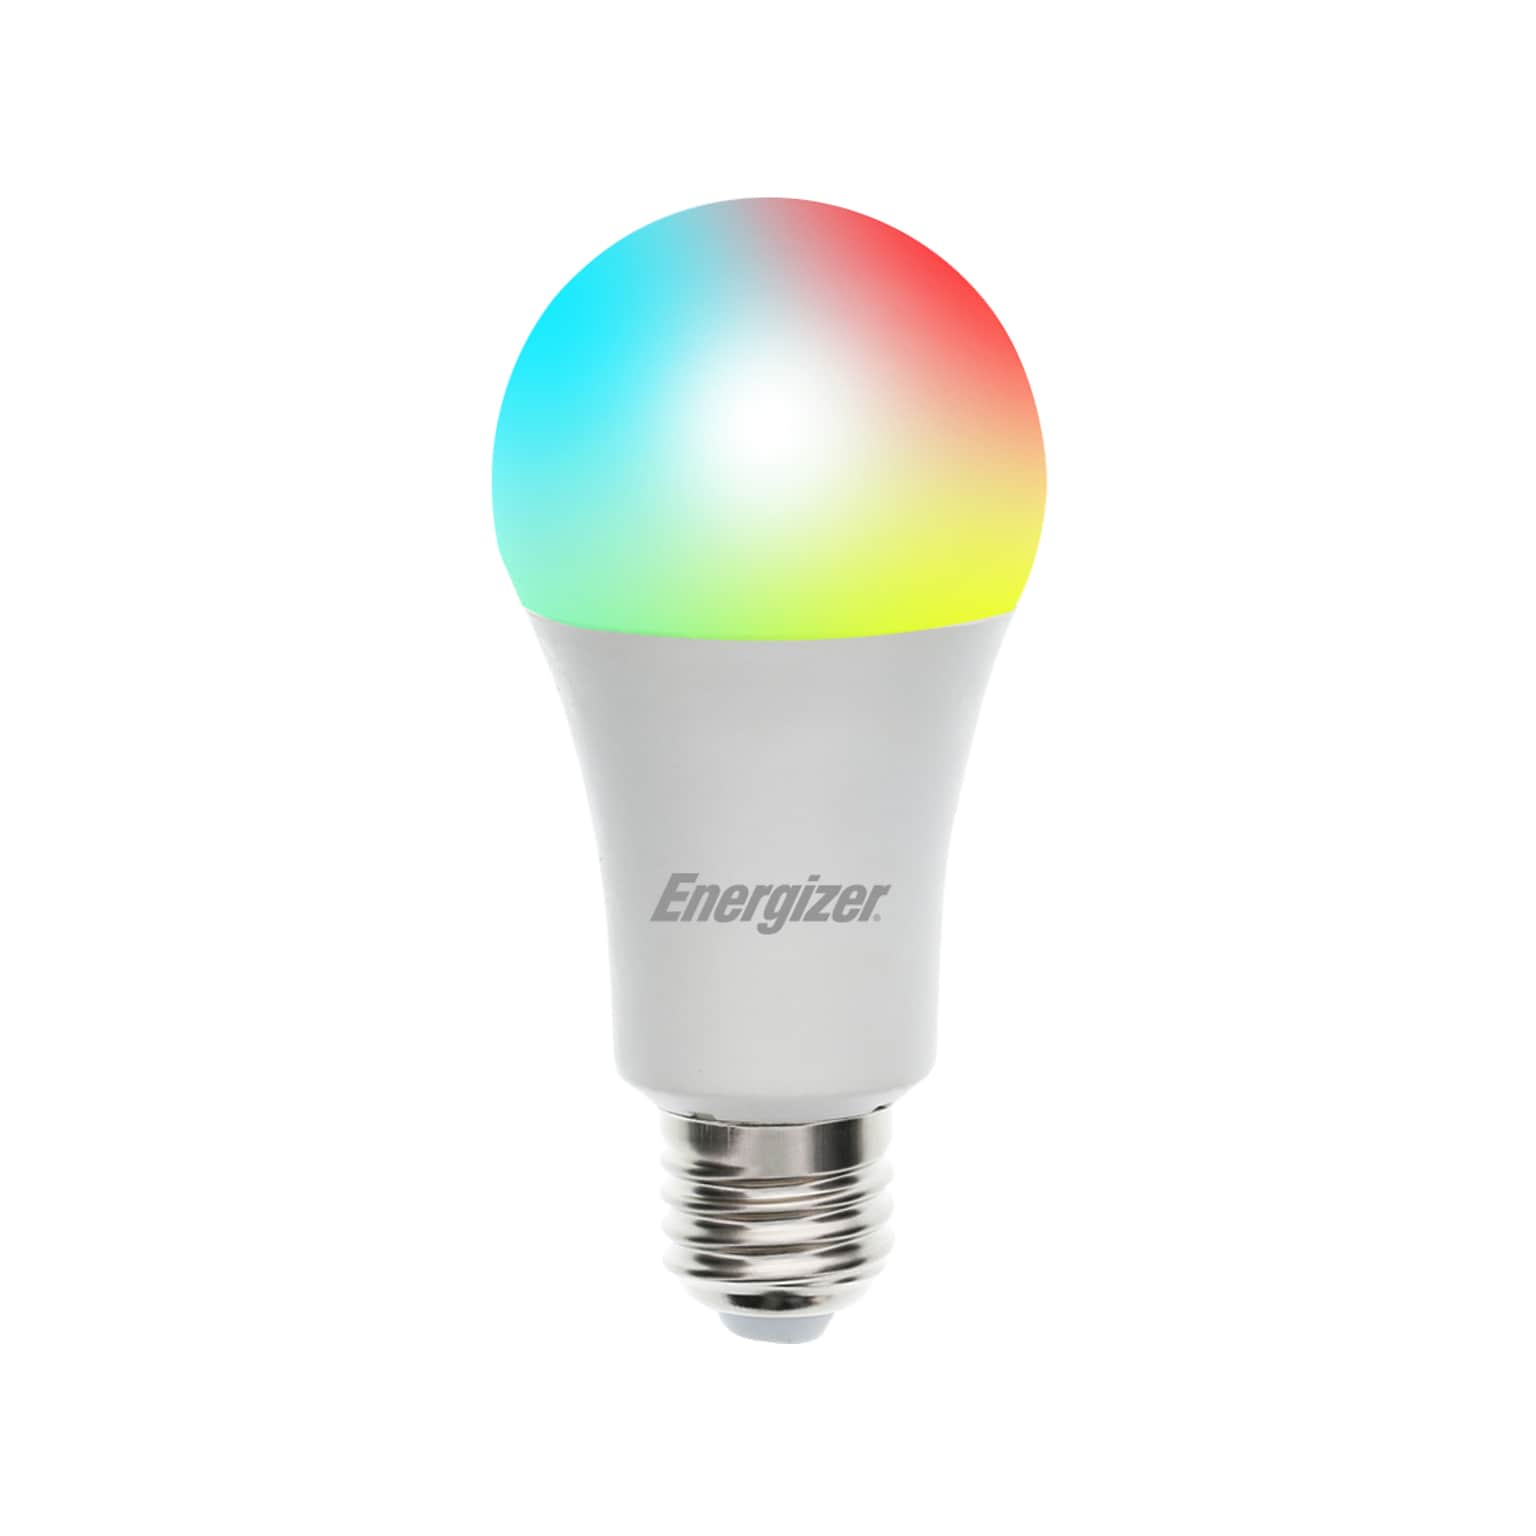 Energizer Connect Smart LED Bulb, Multi-White and Multi-Color, A19 (EAC2-1003-RGB)